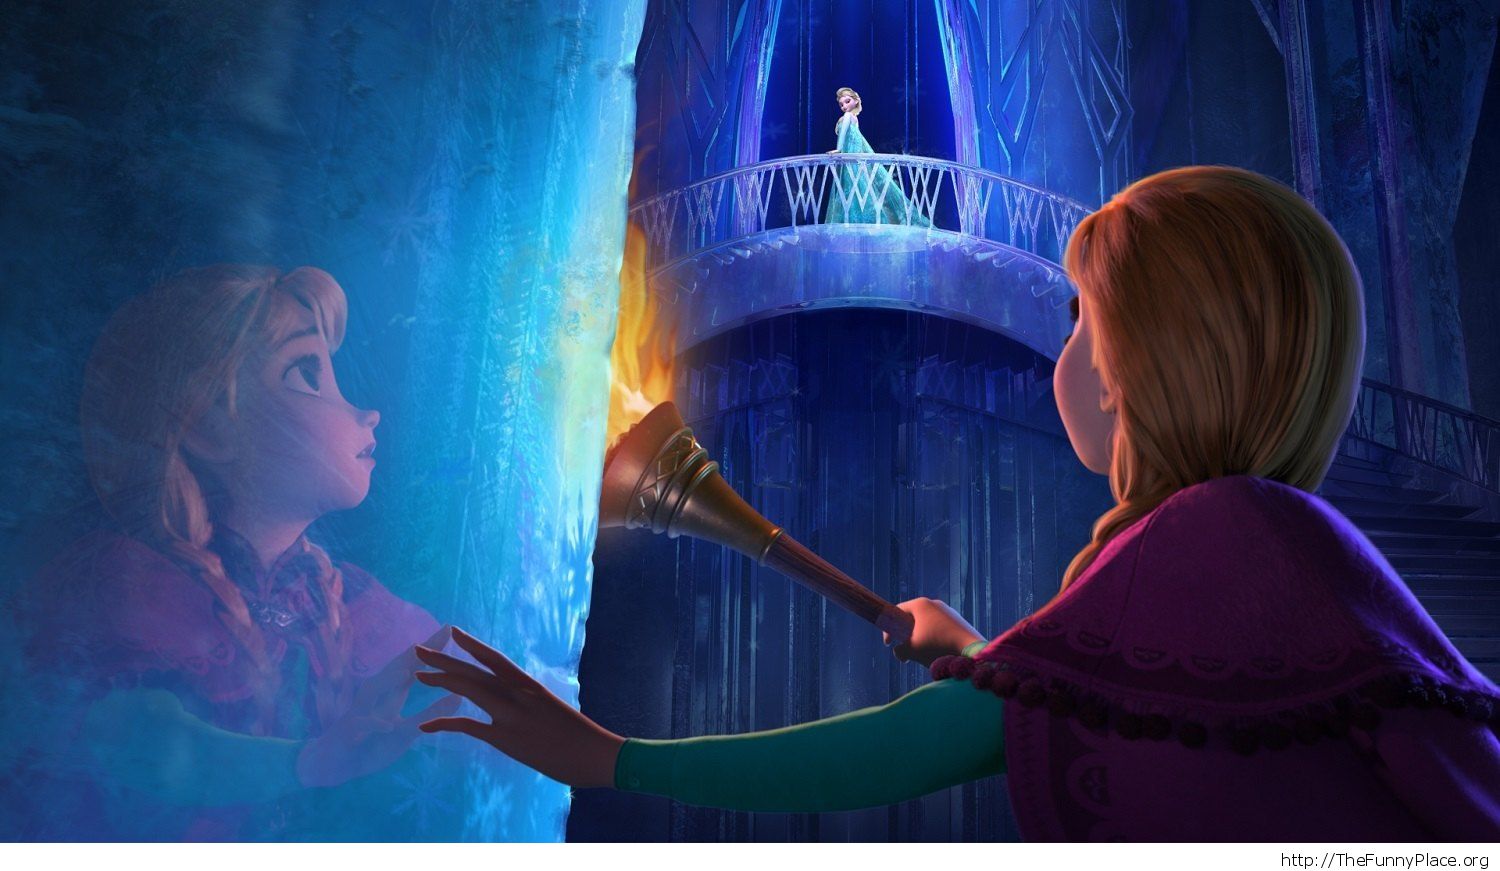 "FROZEN" (Top to Bottom) ELSA and ANNA. ©2013 Disney. All Rights Reserved.